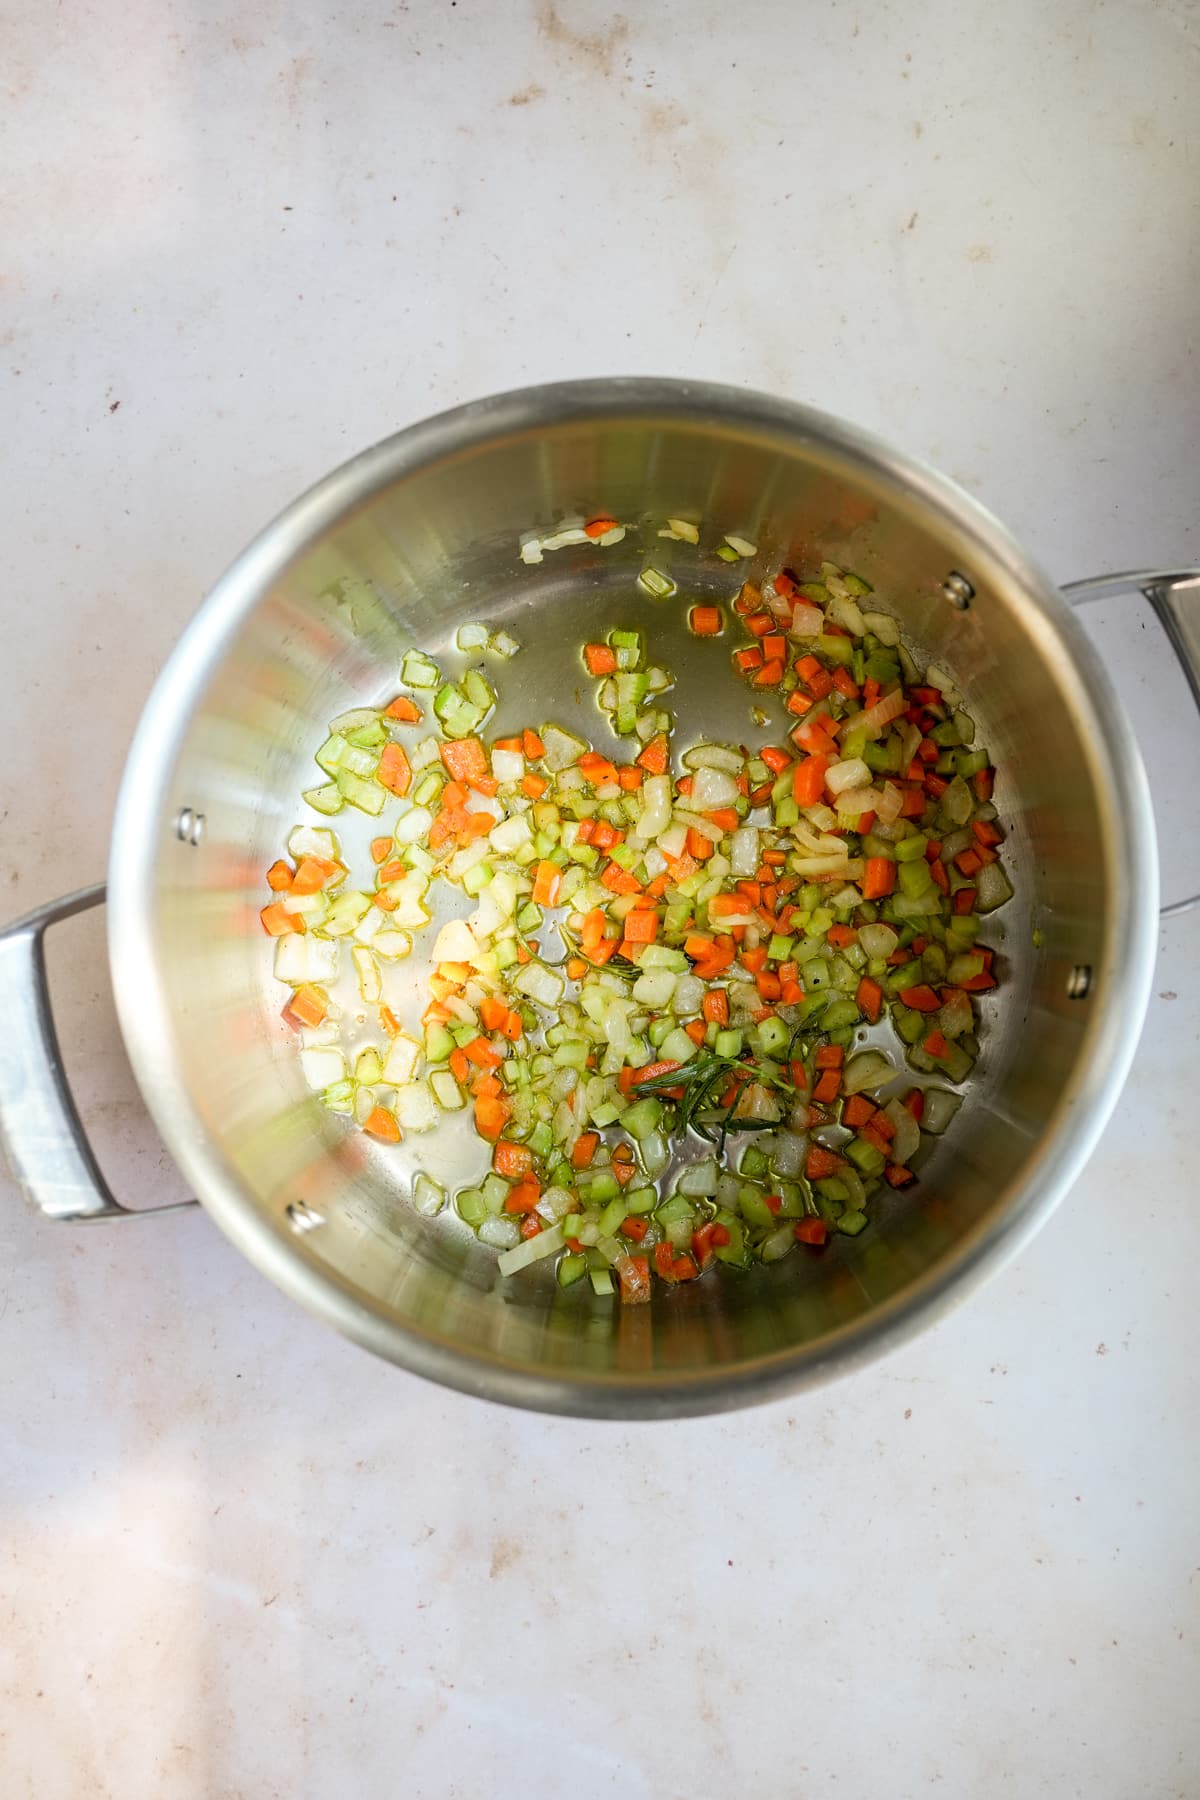 Chopped celery, carrot, onion and rosemary in a pot sauteed in olive oil